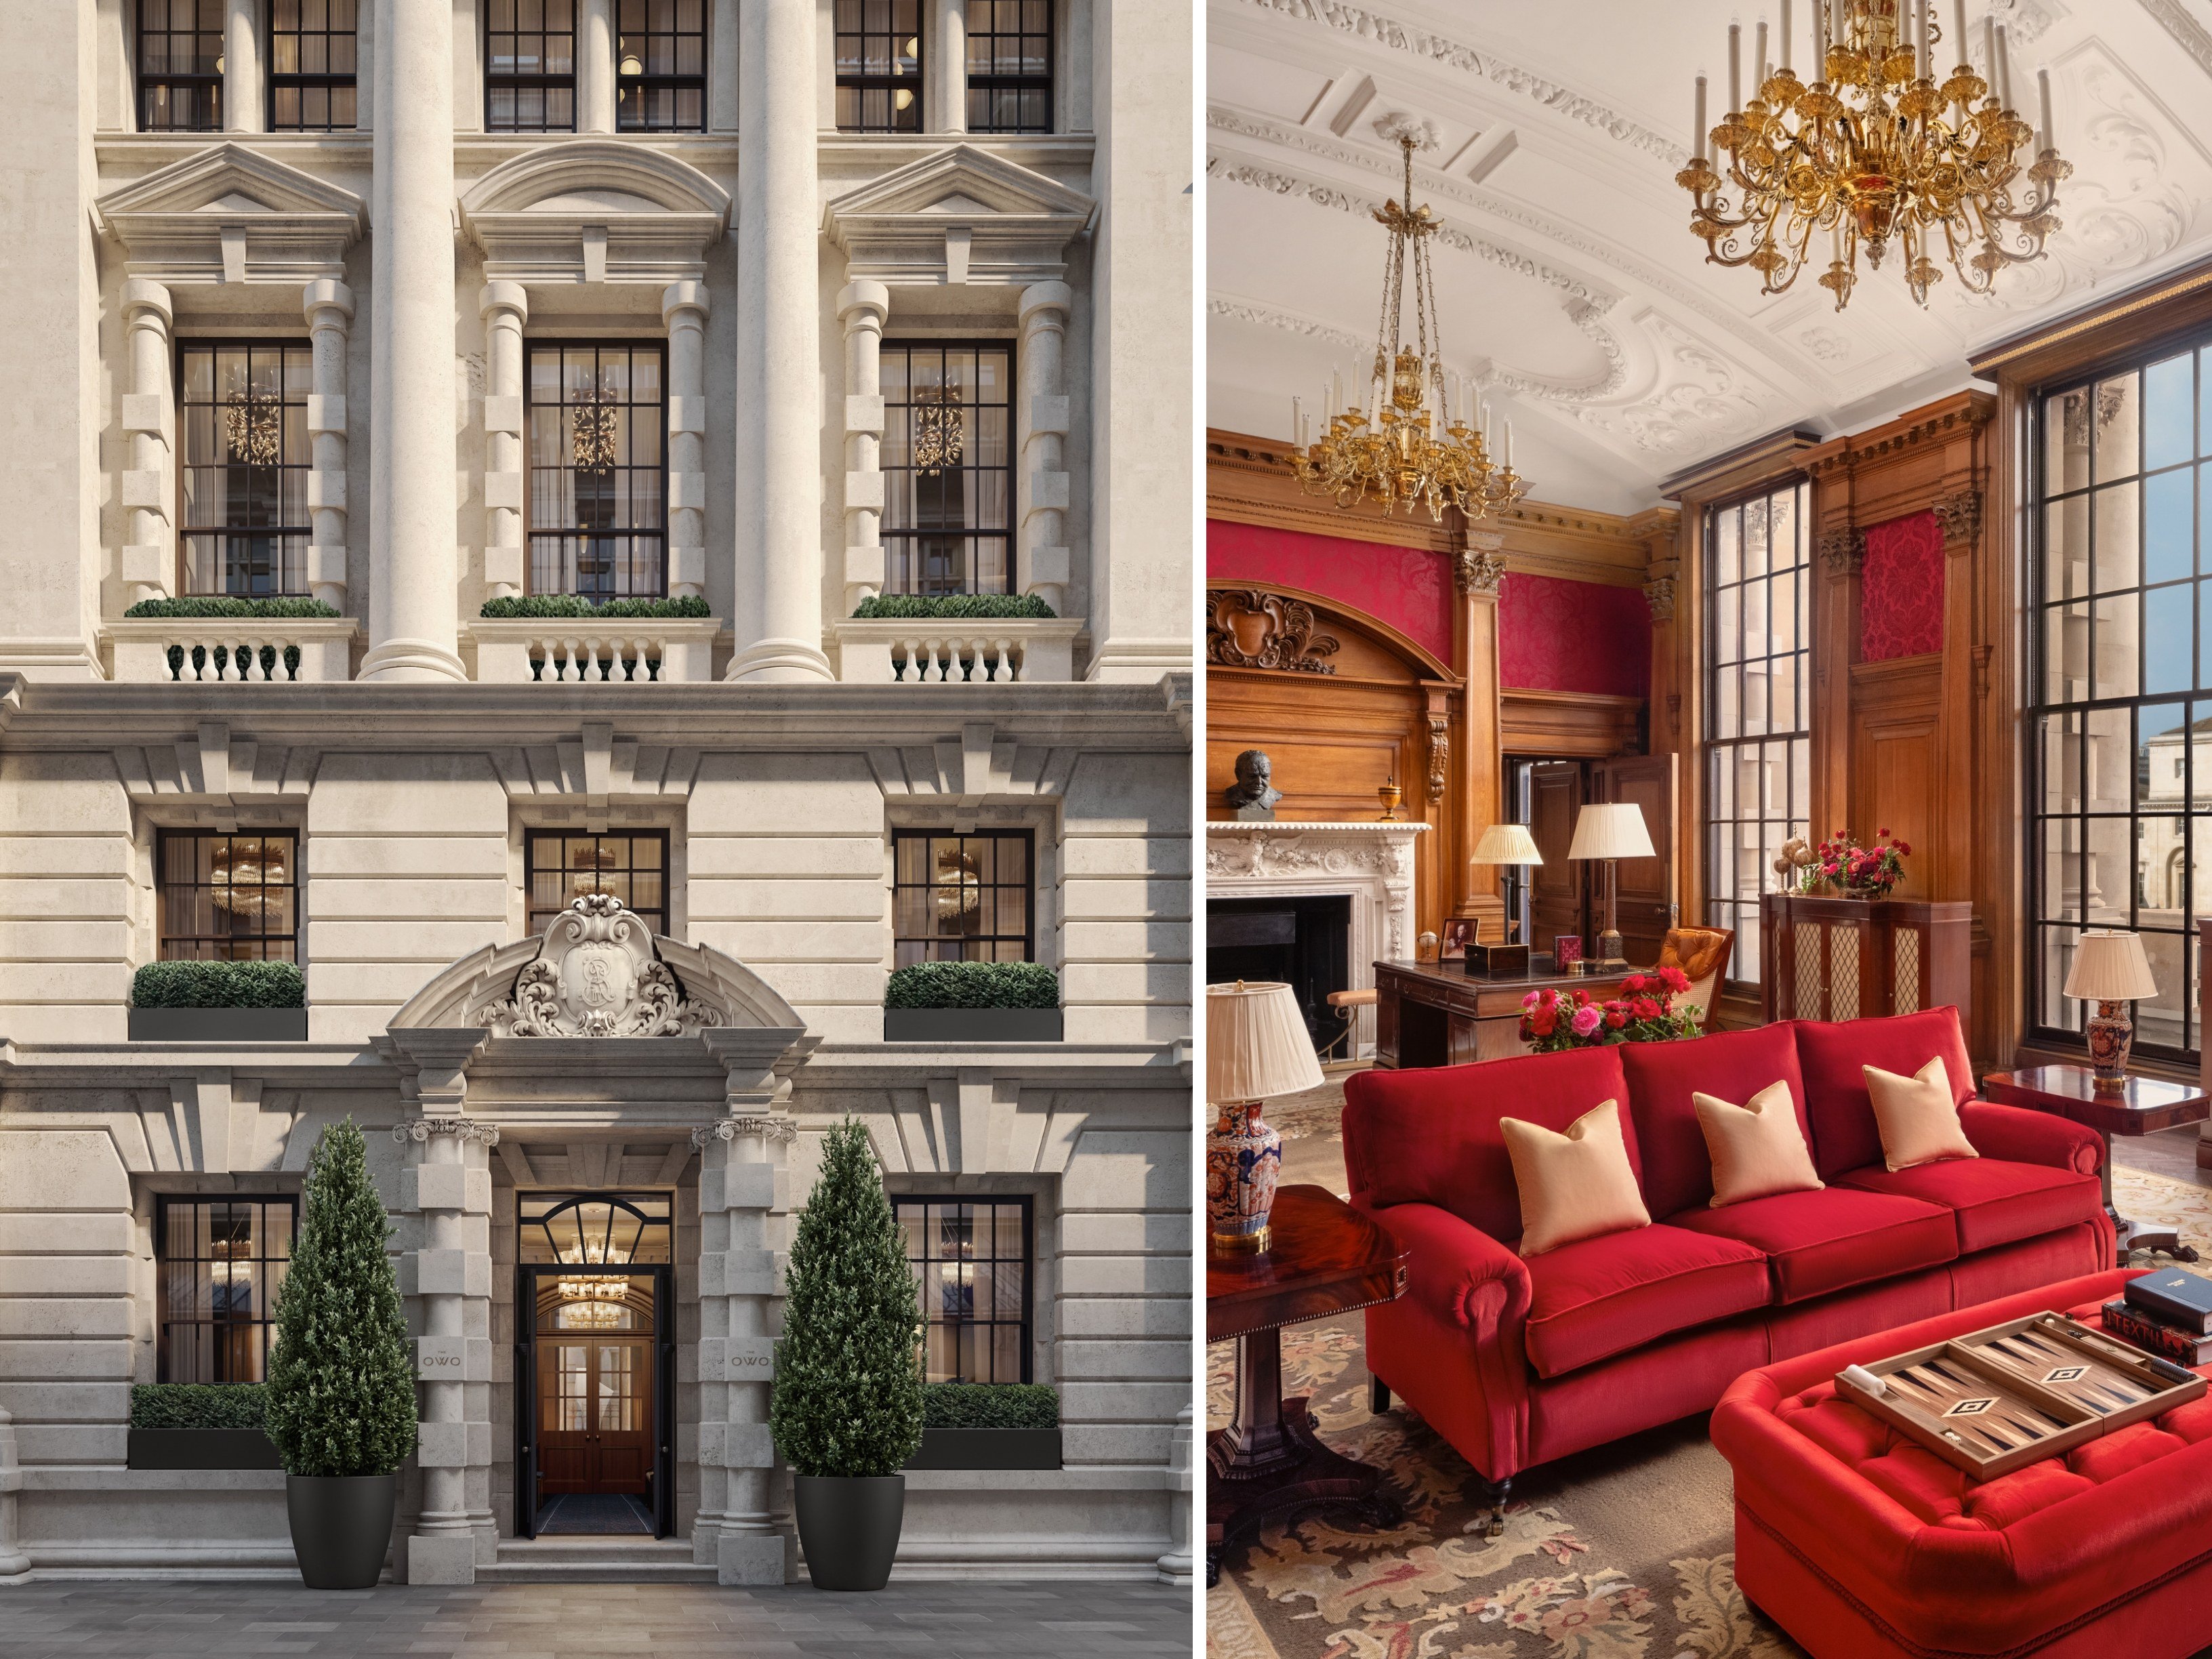 Once housing the War Office, London’s Raffles OWO blends opulence with history. Photos: Handout